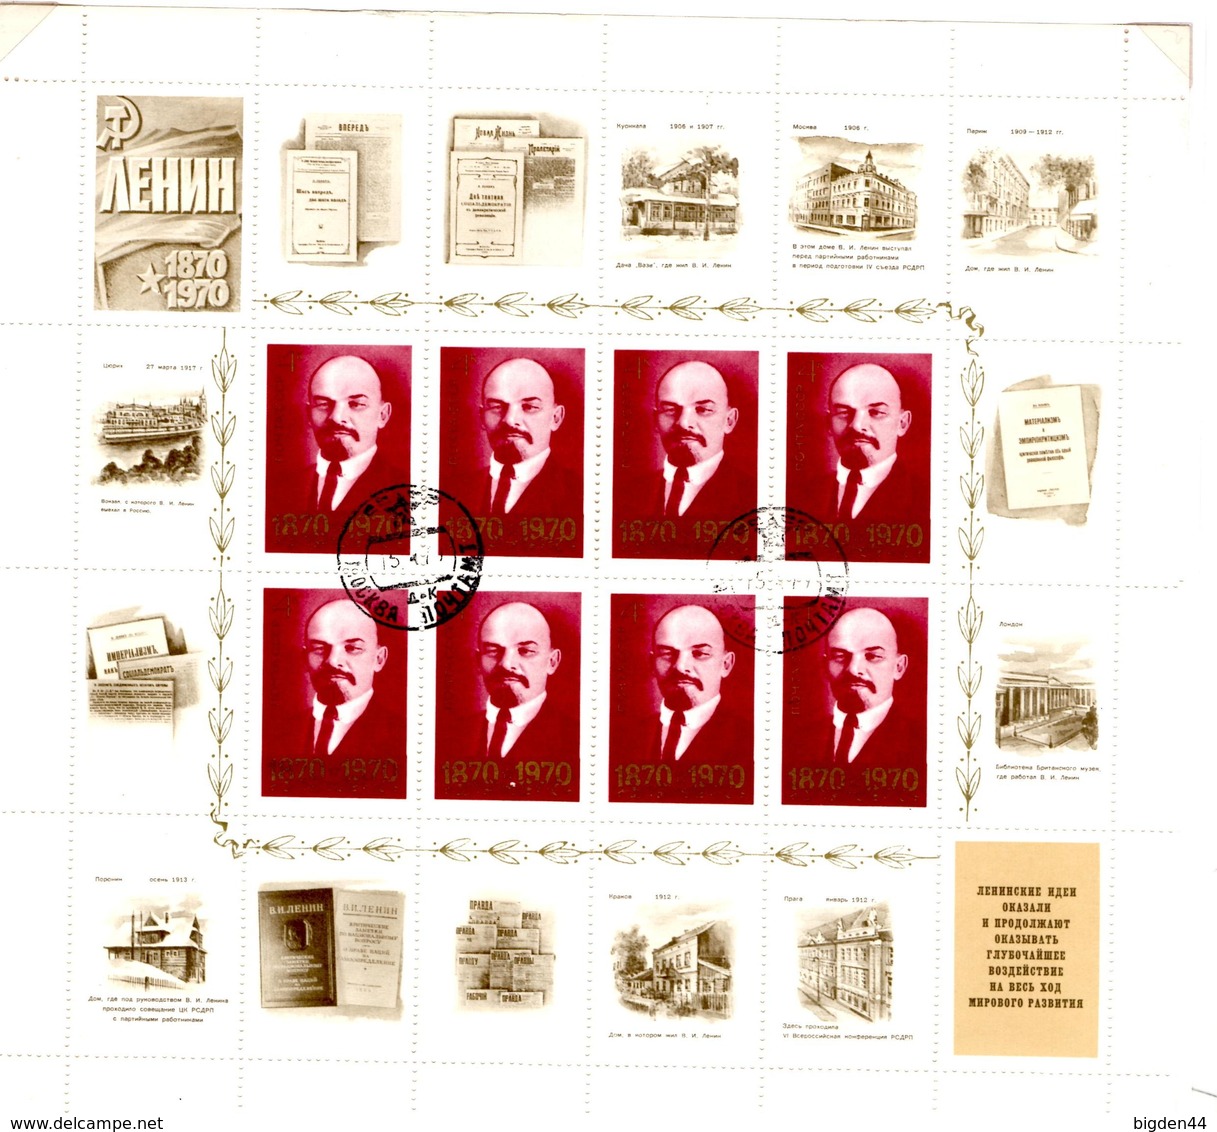 9 Bloc Feuillets / Souvenir Sheets URSS_Lenine_1970_cancelled But Not Hinged, Good Quality - Full Sheets